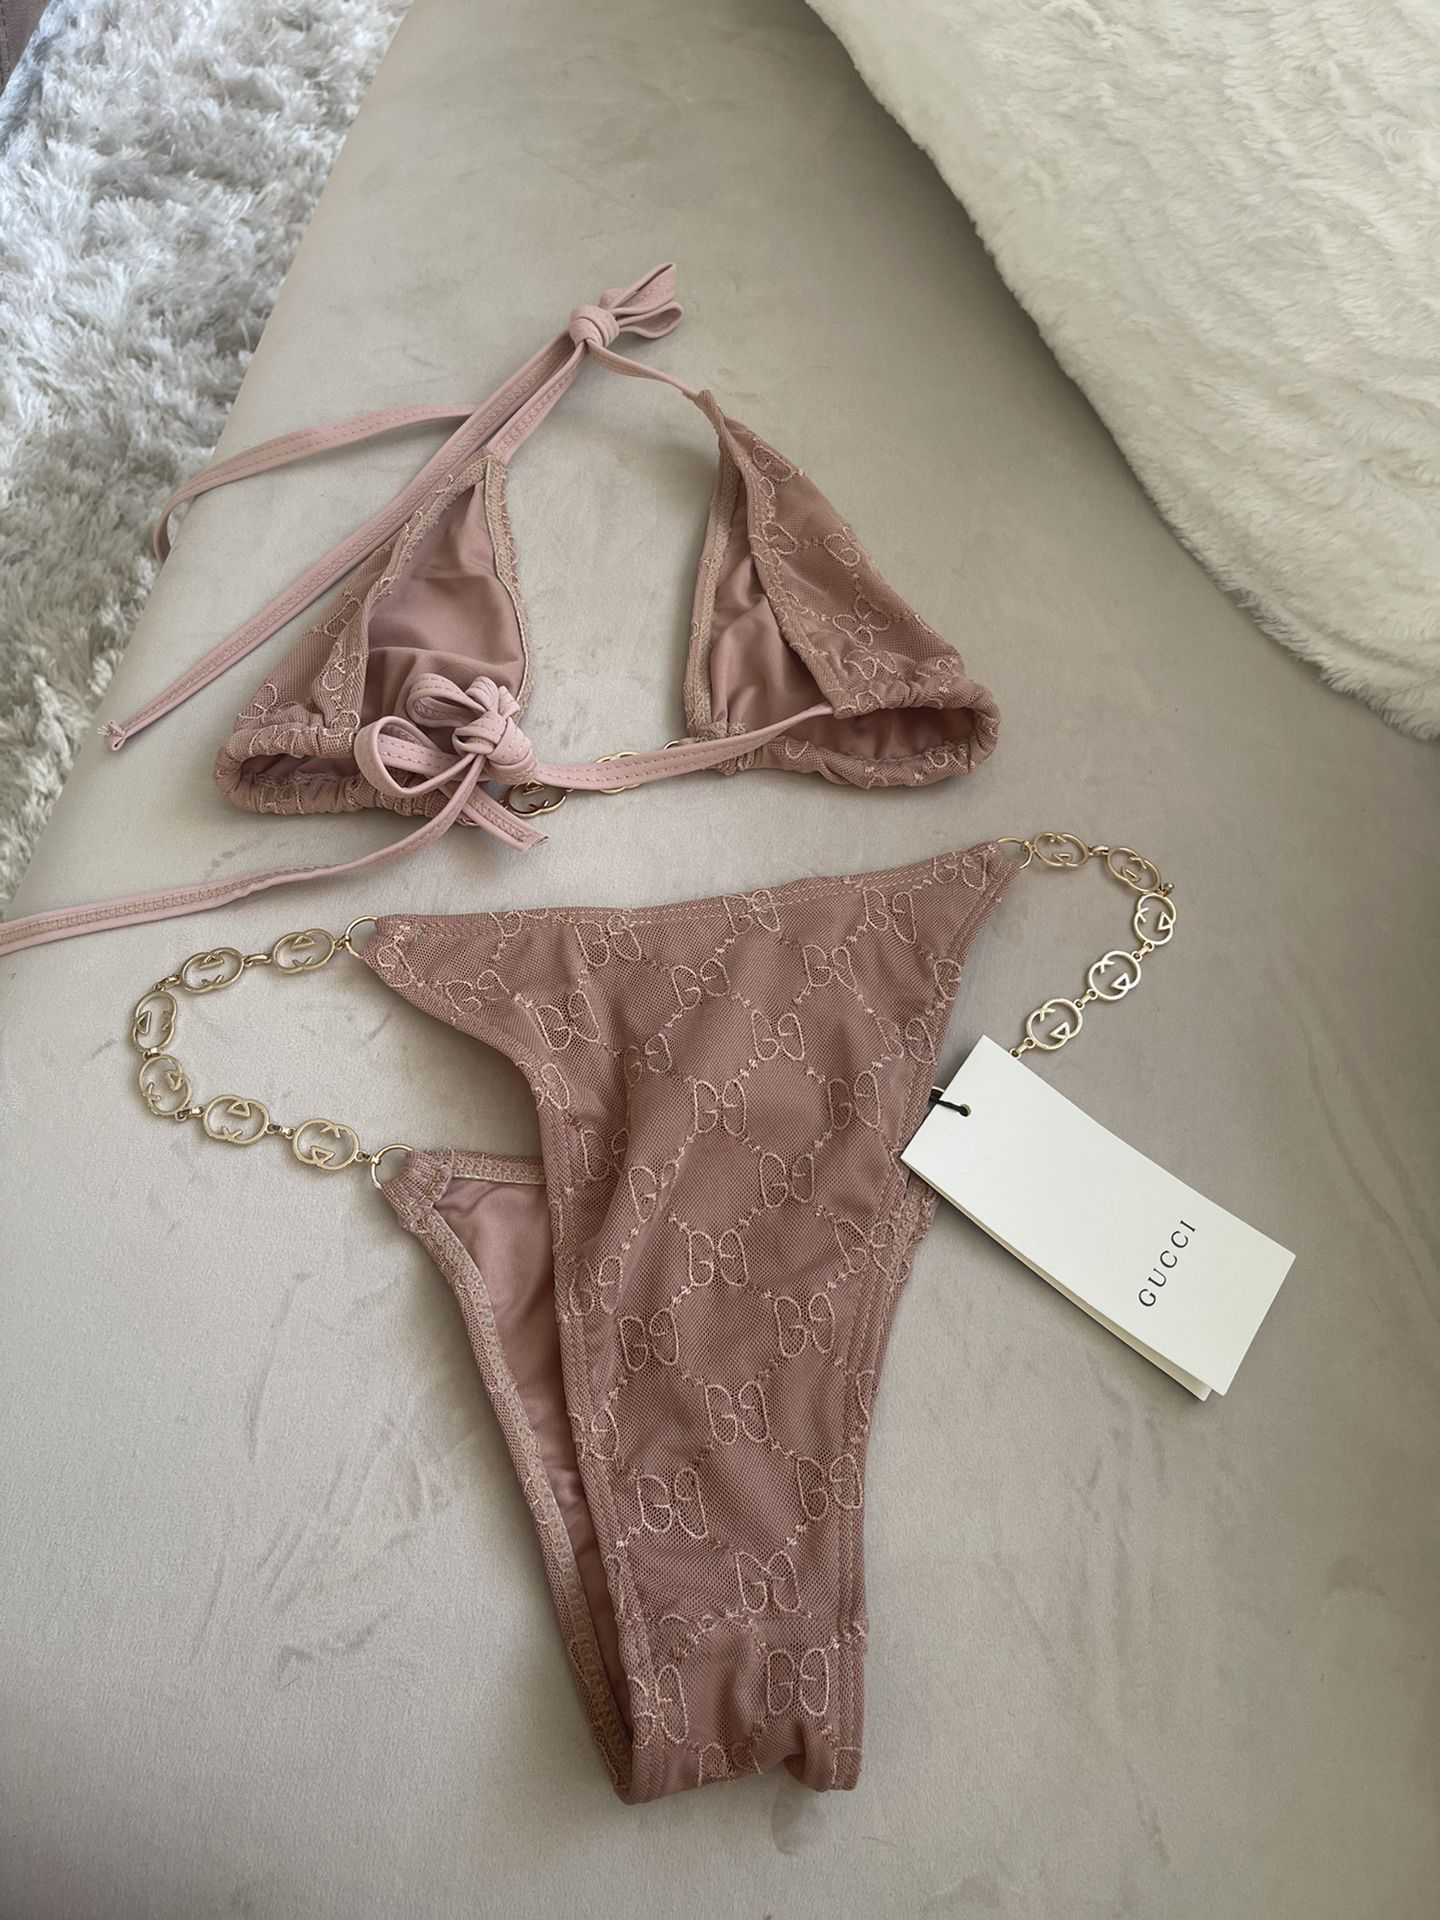 GUCCI BATHING SUIT (Medium Only) for Sale in Fontana, CA - OfferUp